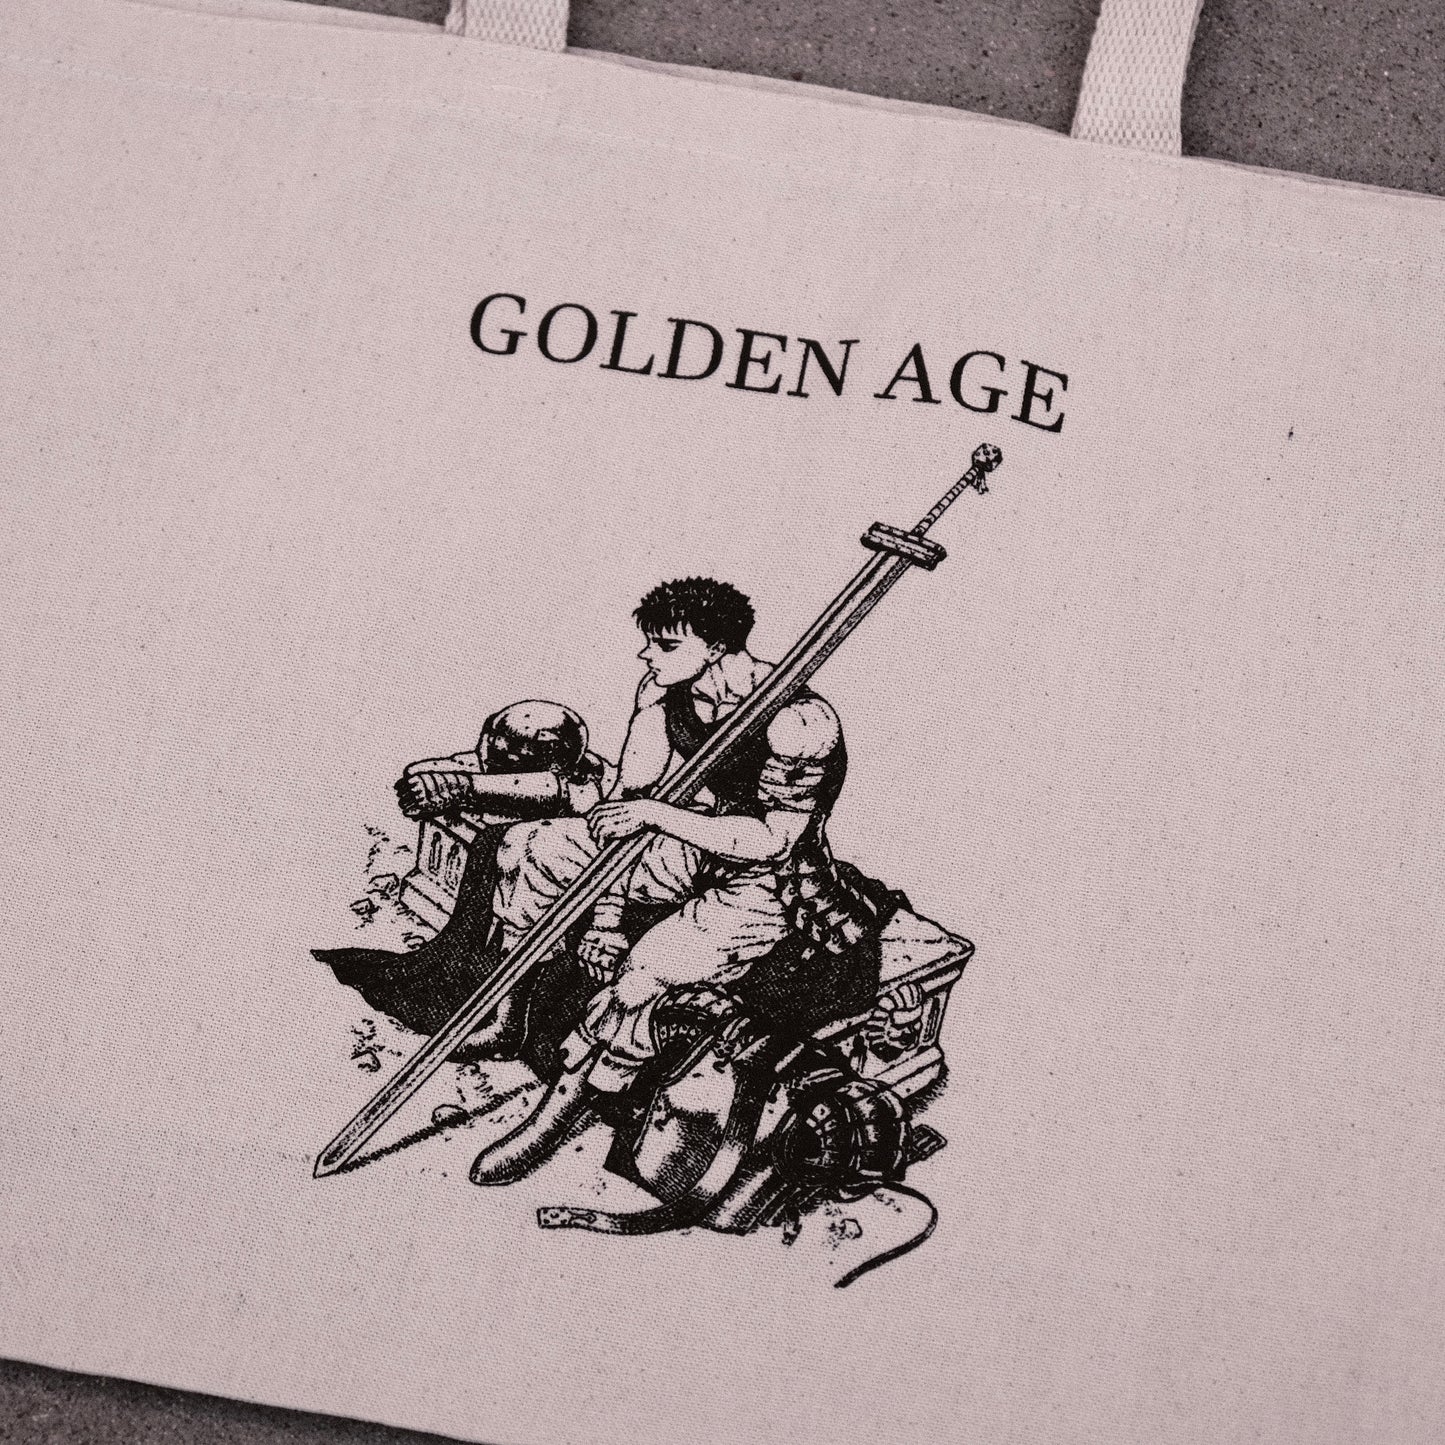 GOLDEN AGE TOTE